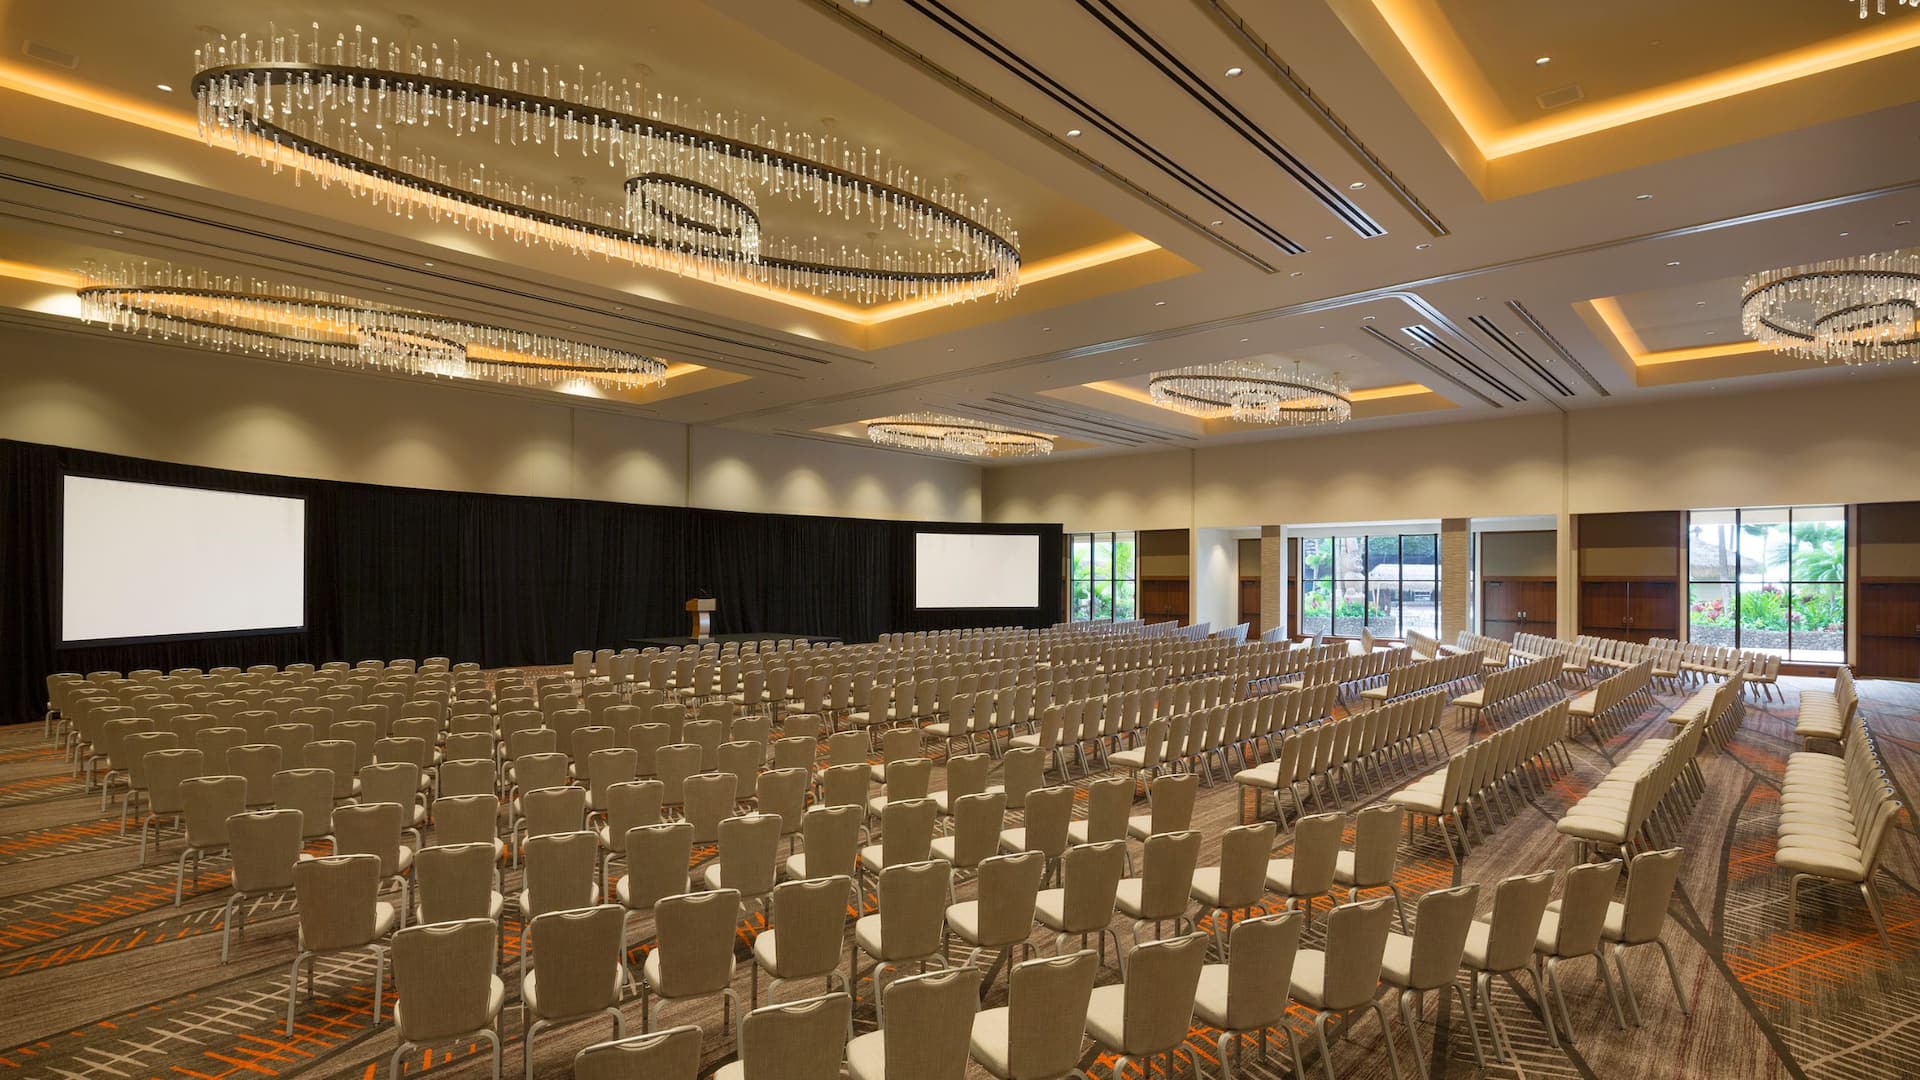 Monarchy Ballroom with podium and equipped with projector at Hyatt Regency Maui Resort and Spa